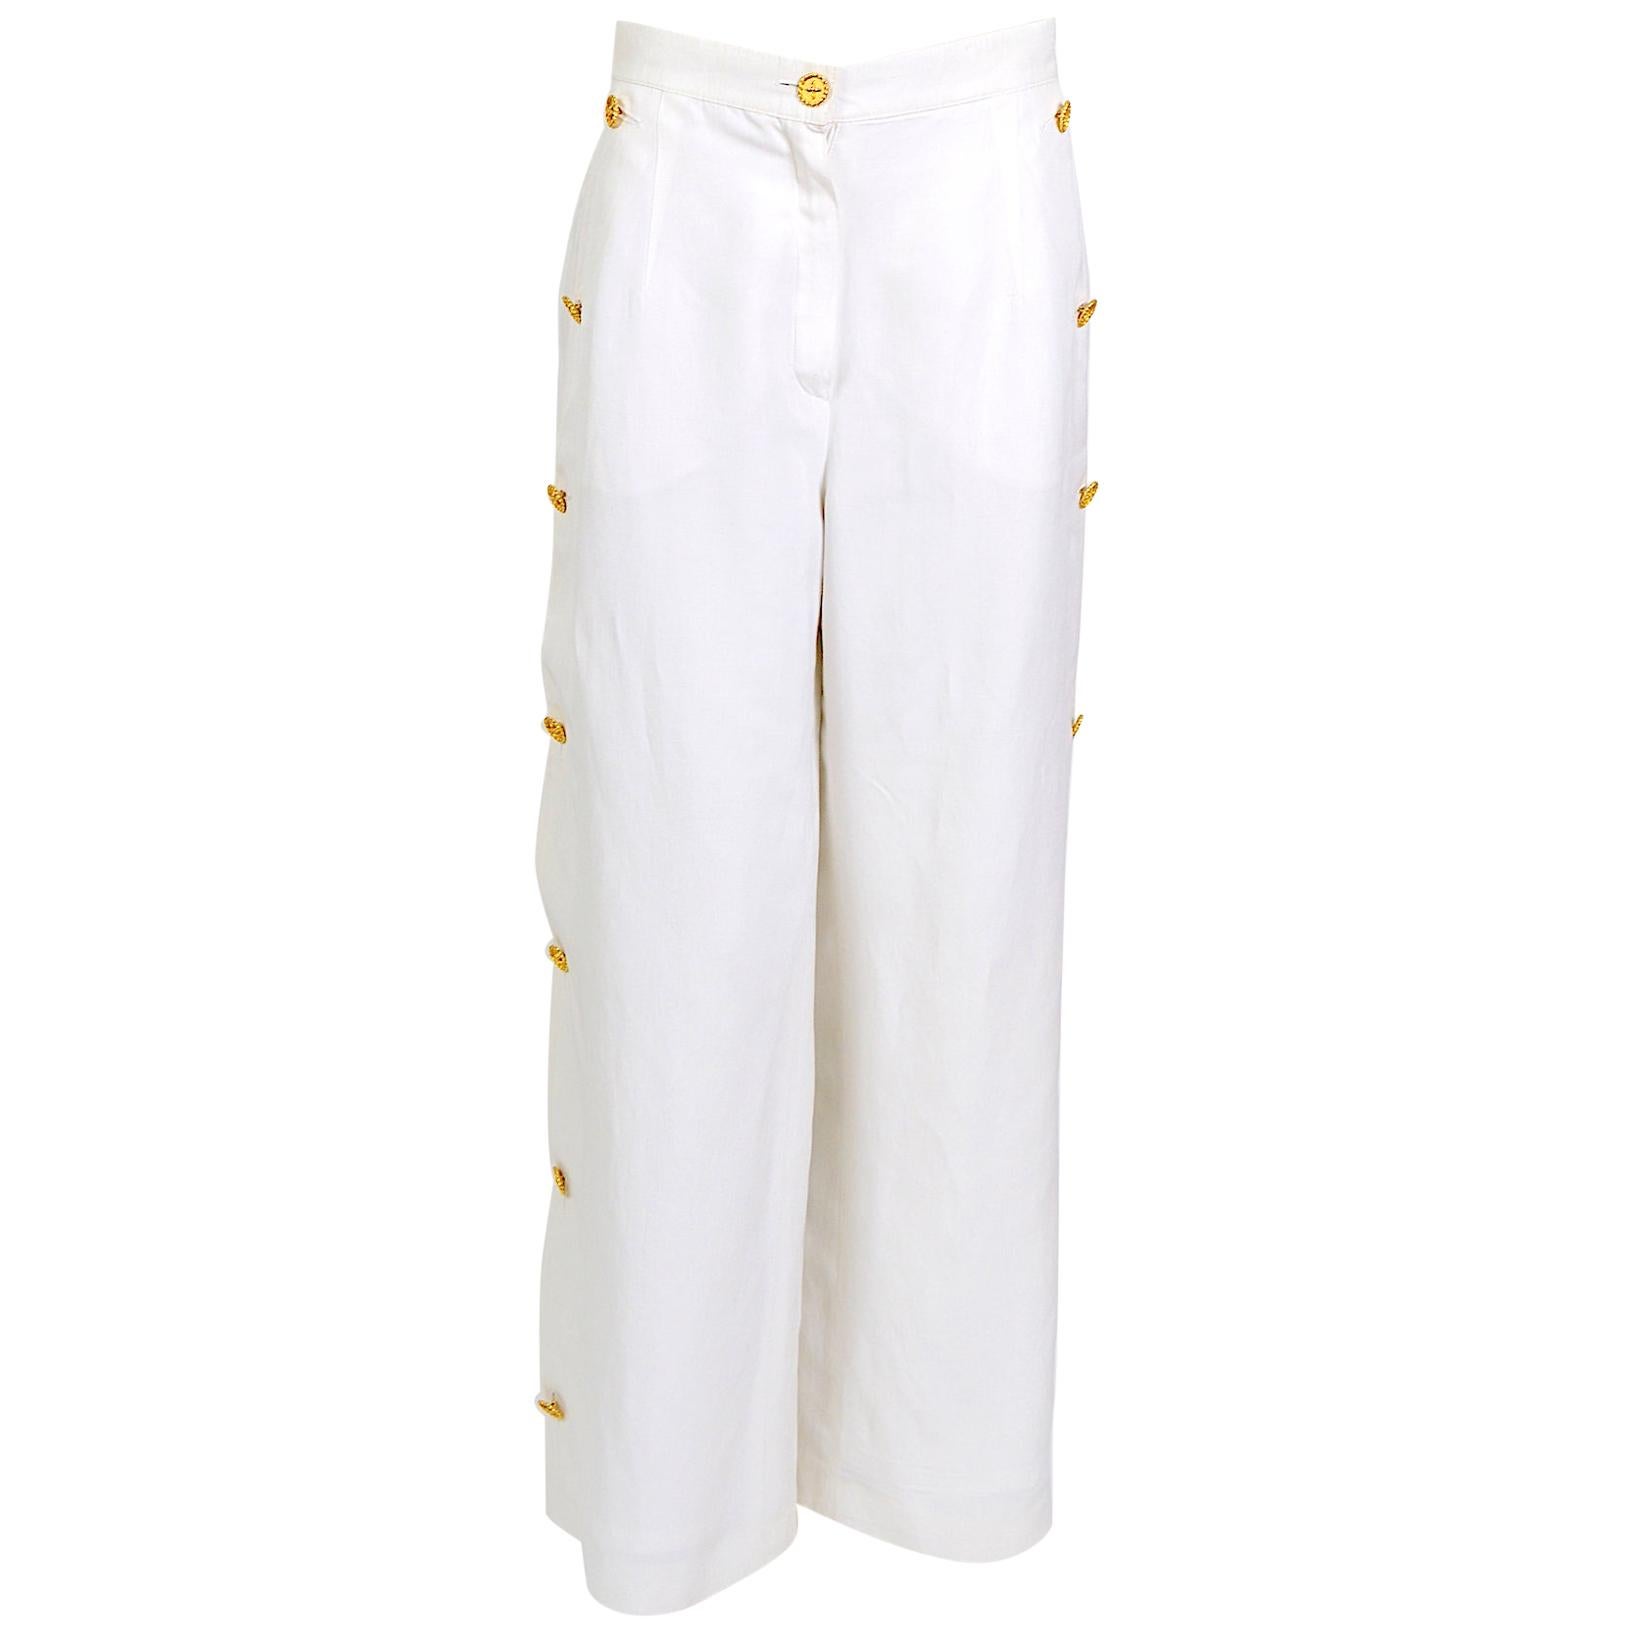 Louis Feraud vintage white linen and gold buttons trousers For